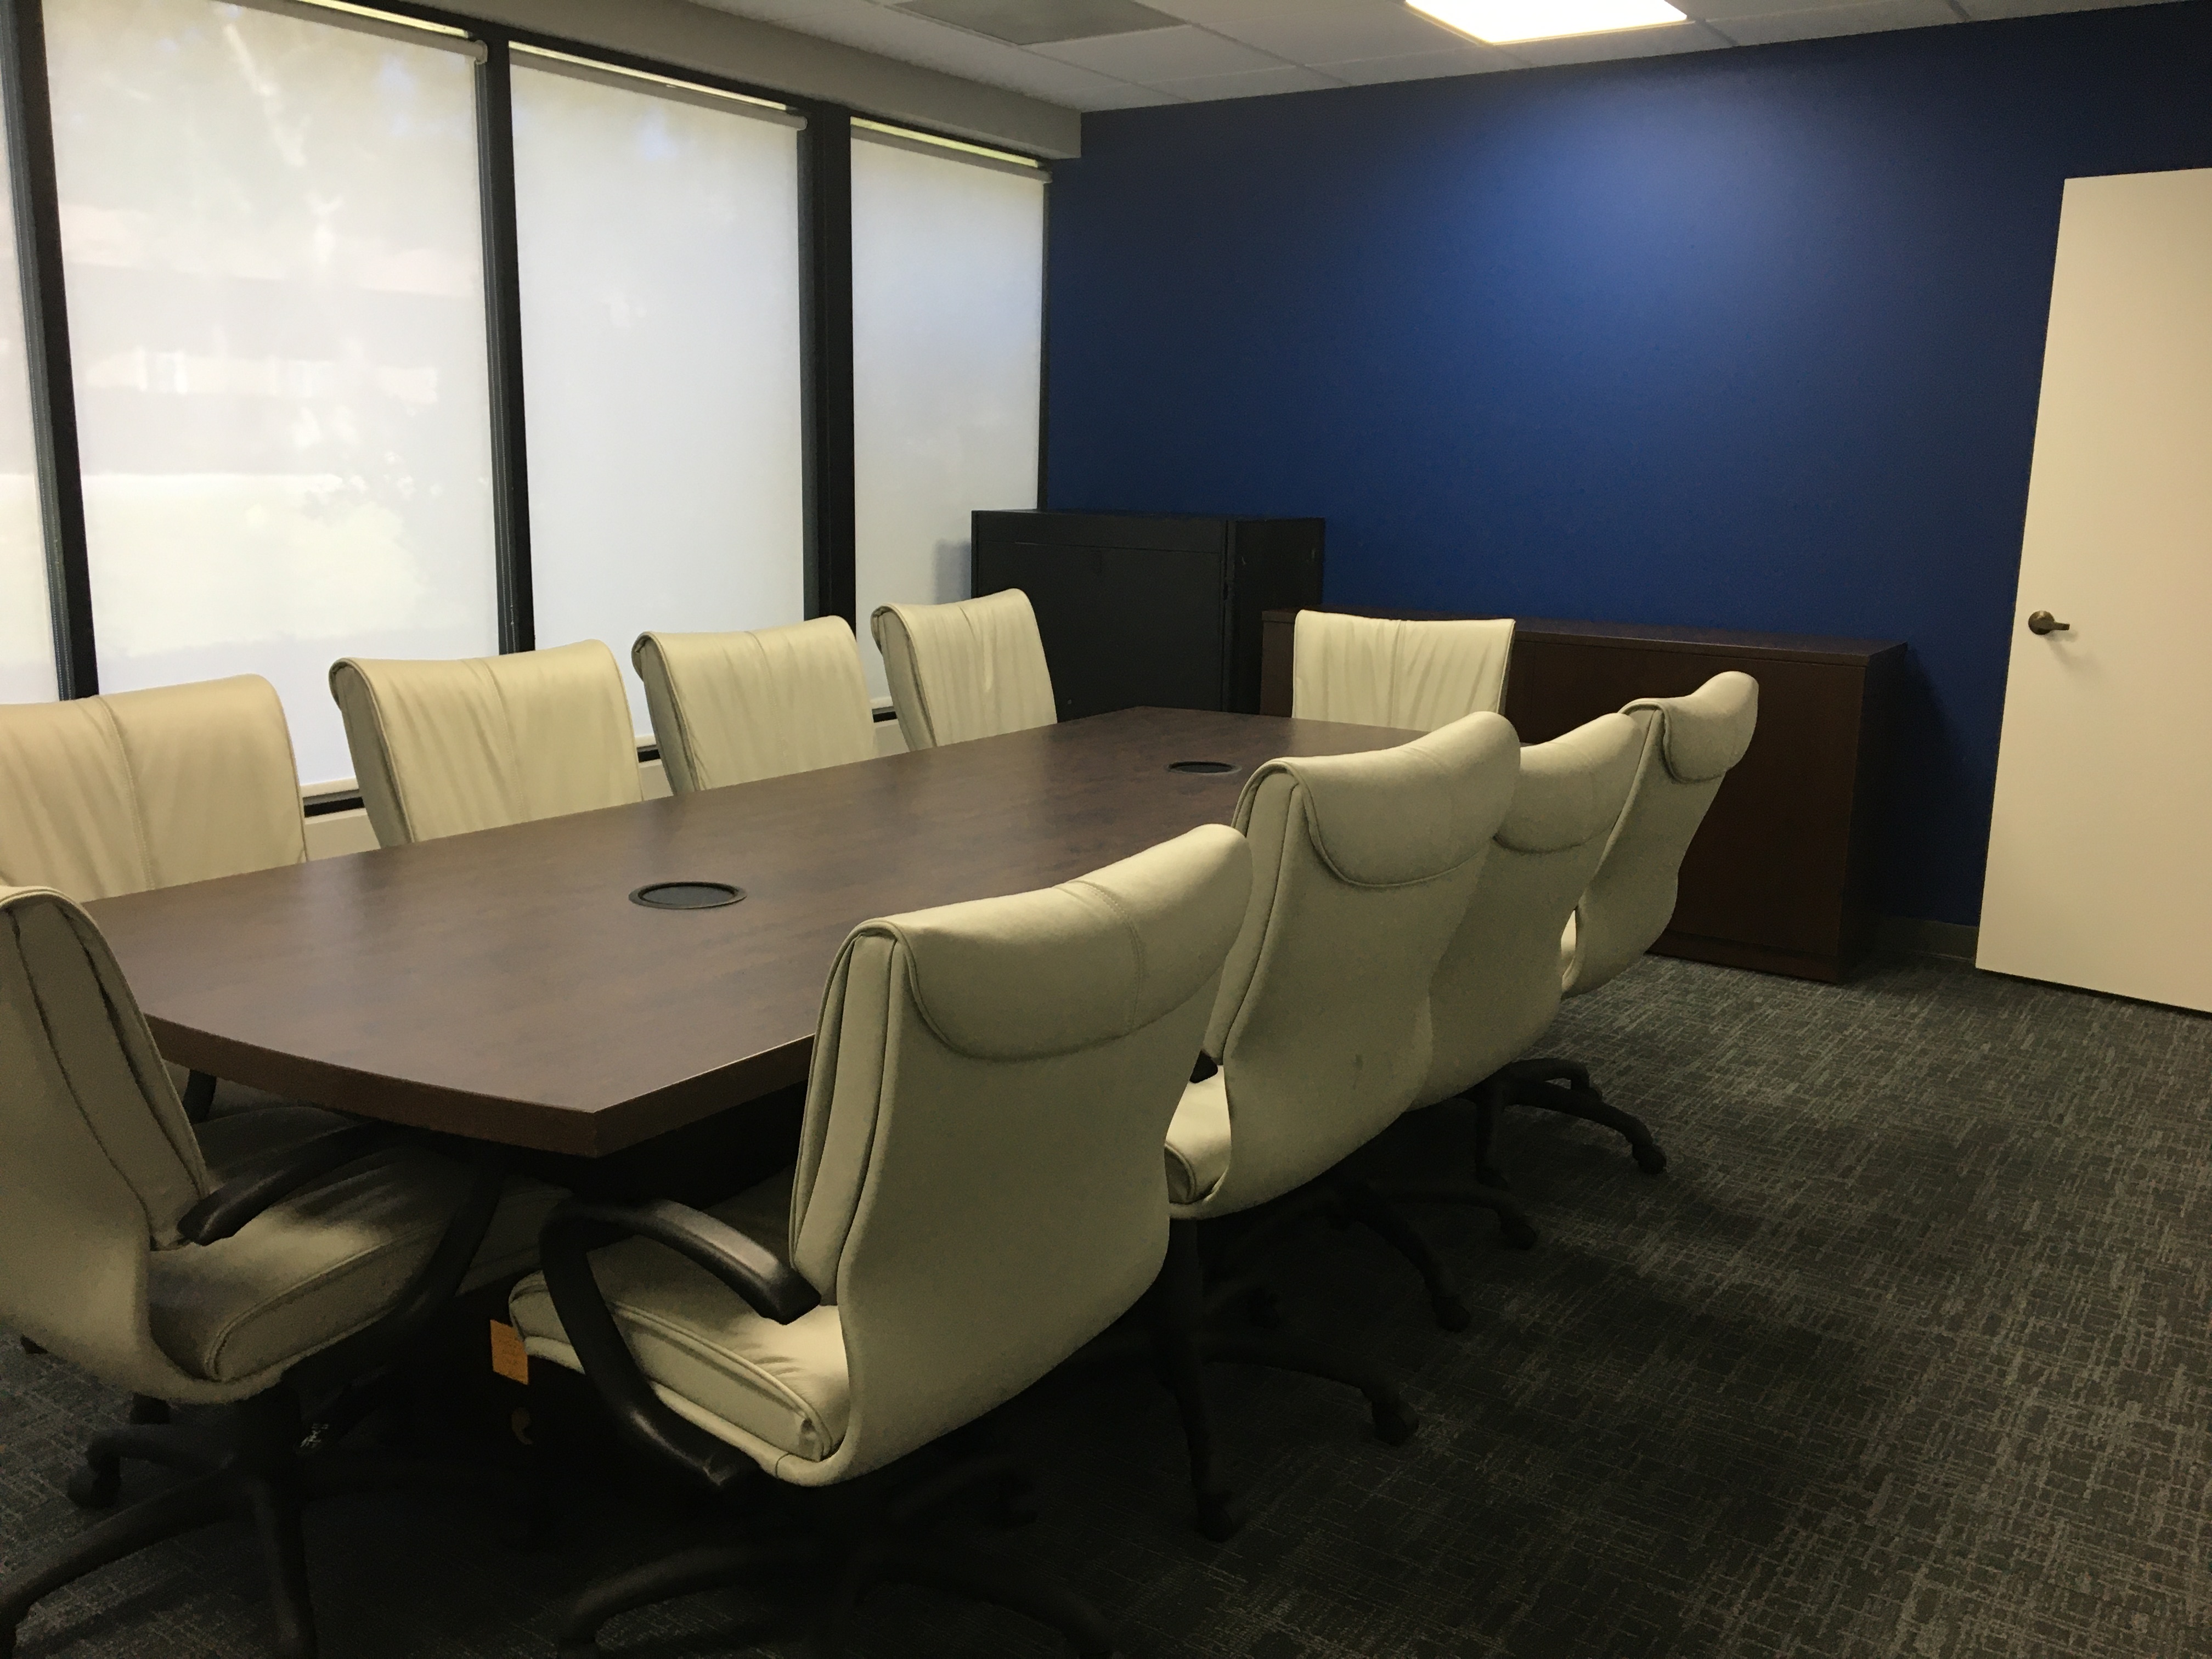 Express Leadership Center–Conference Rooms in Thousand Oaks, CA